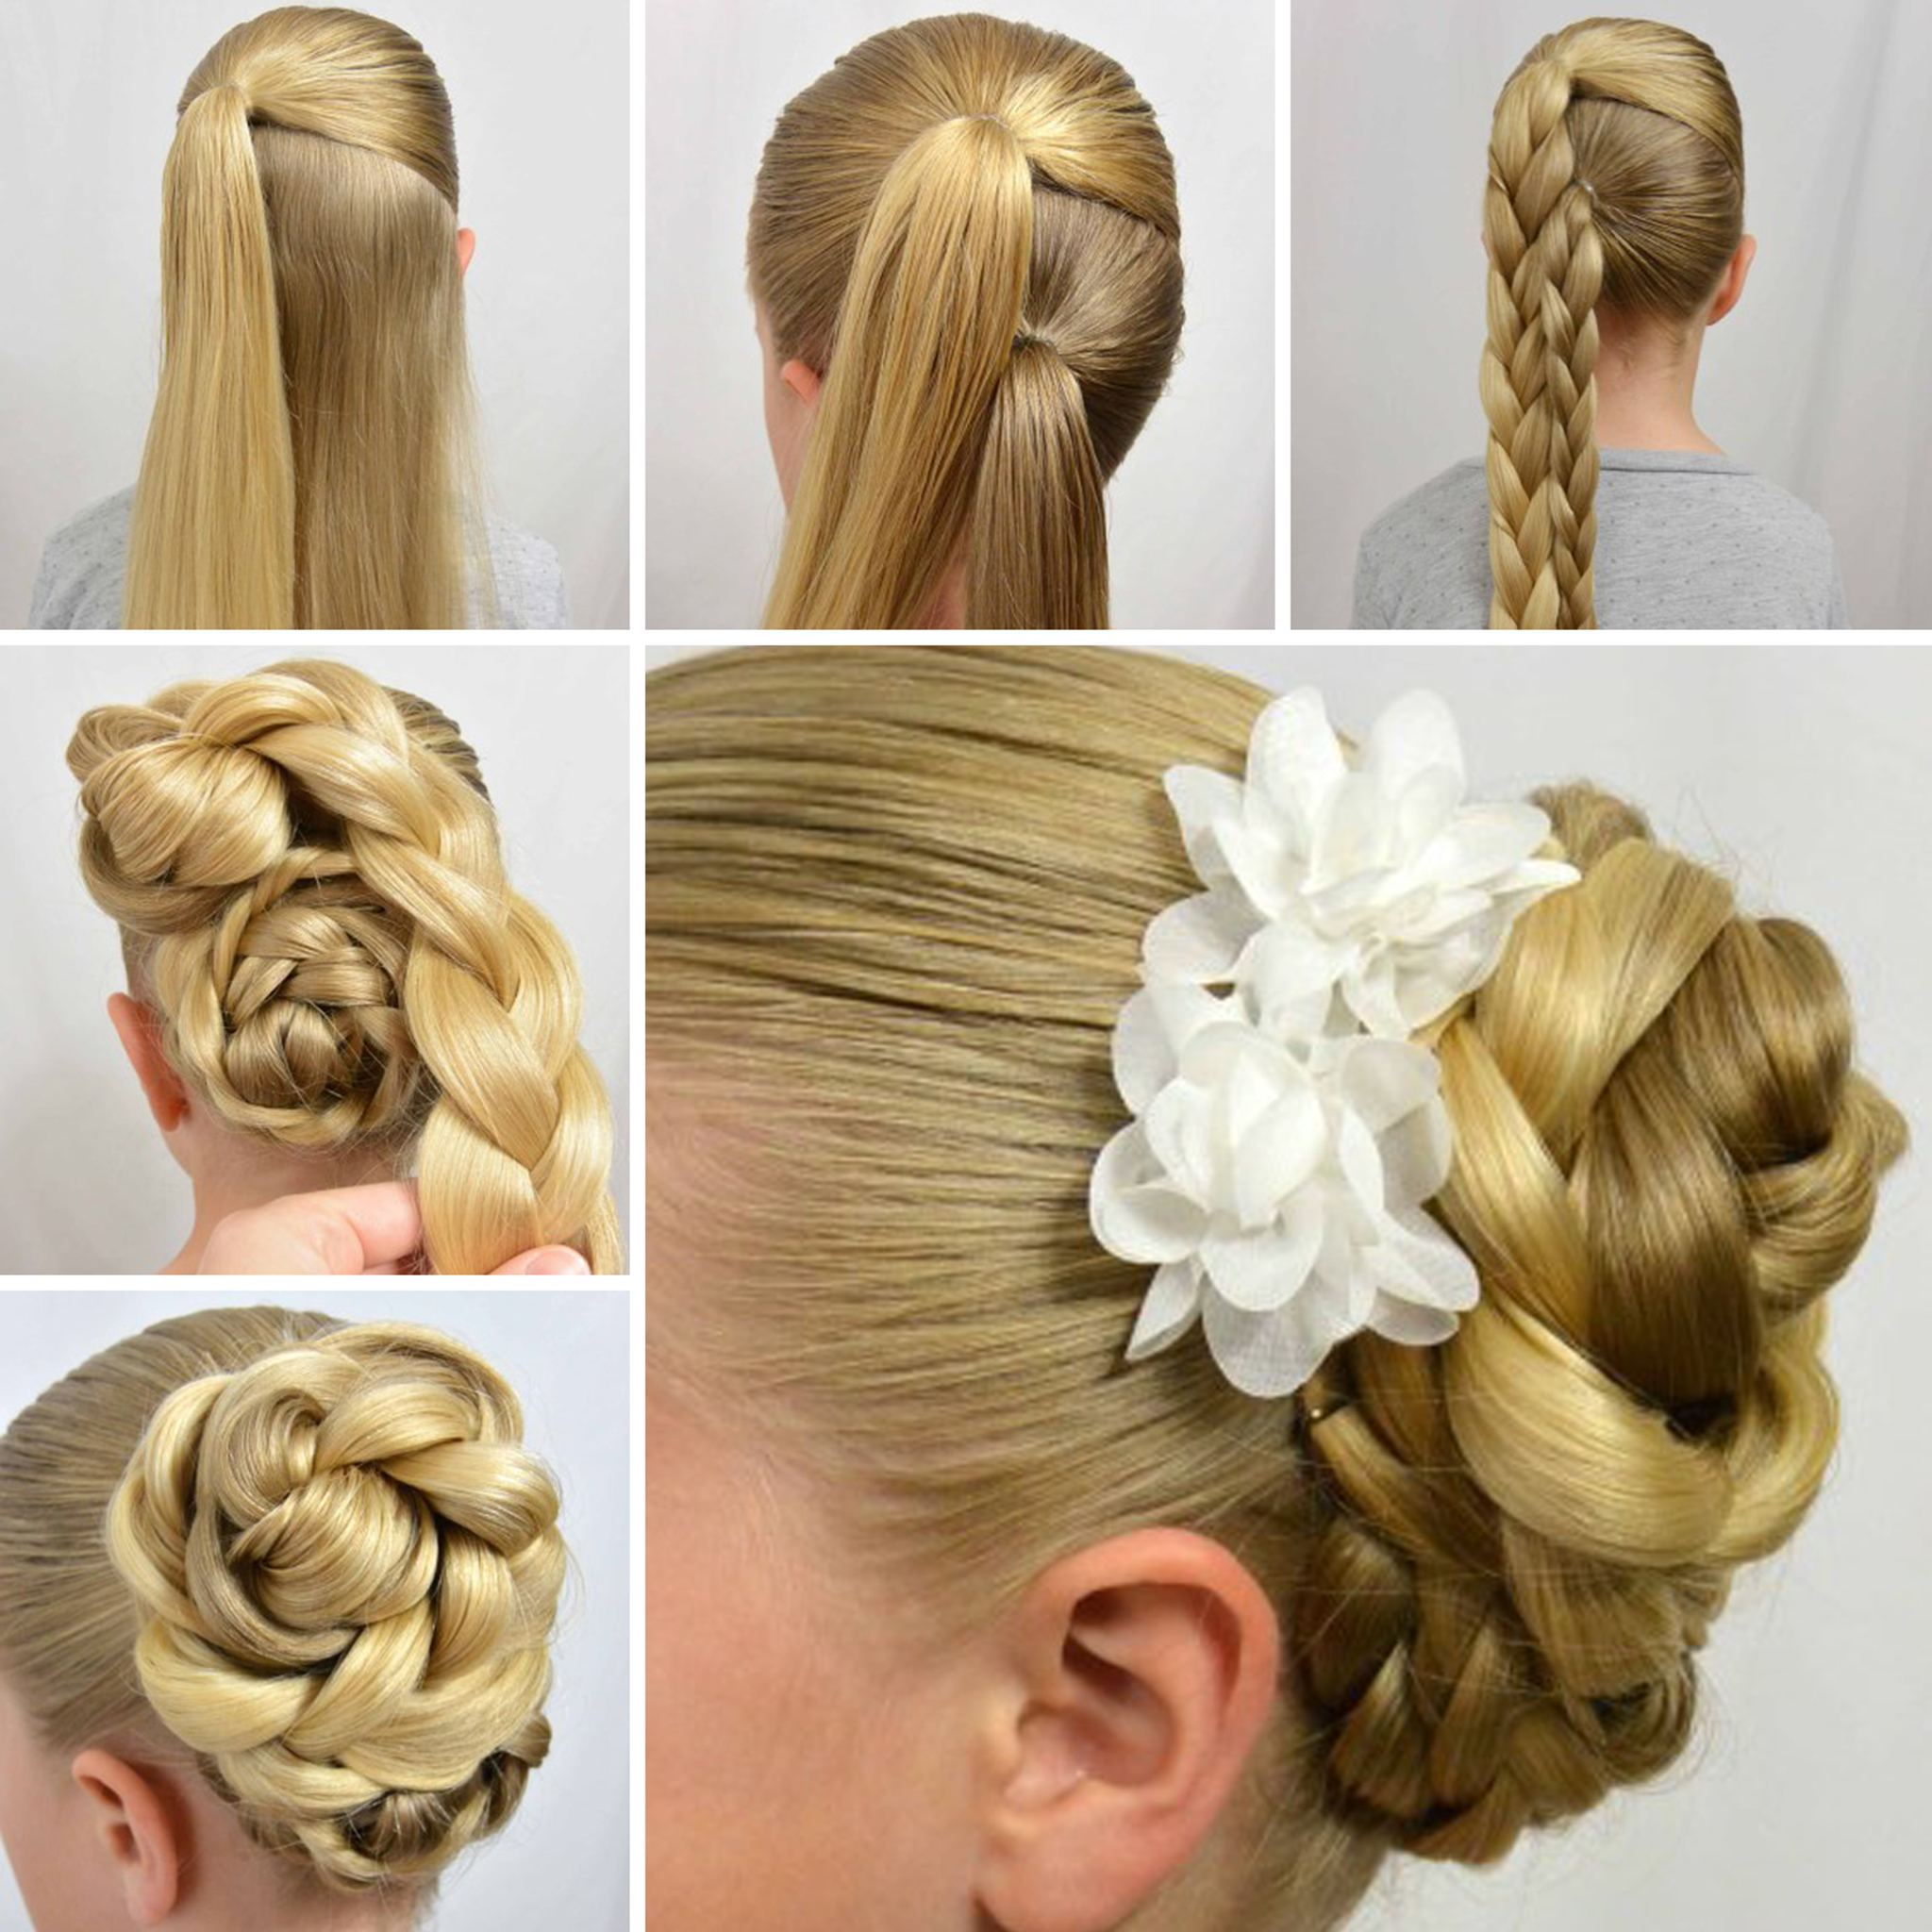 Easy Step By Step Tutorials On How To Do Braided Hairstyle ...